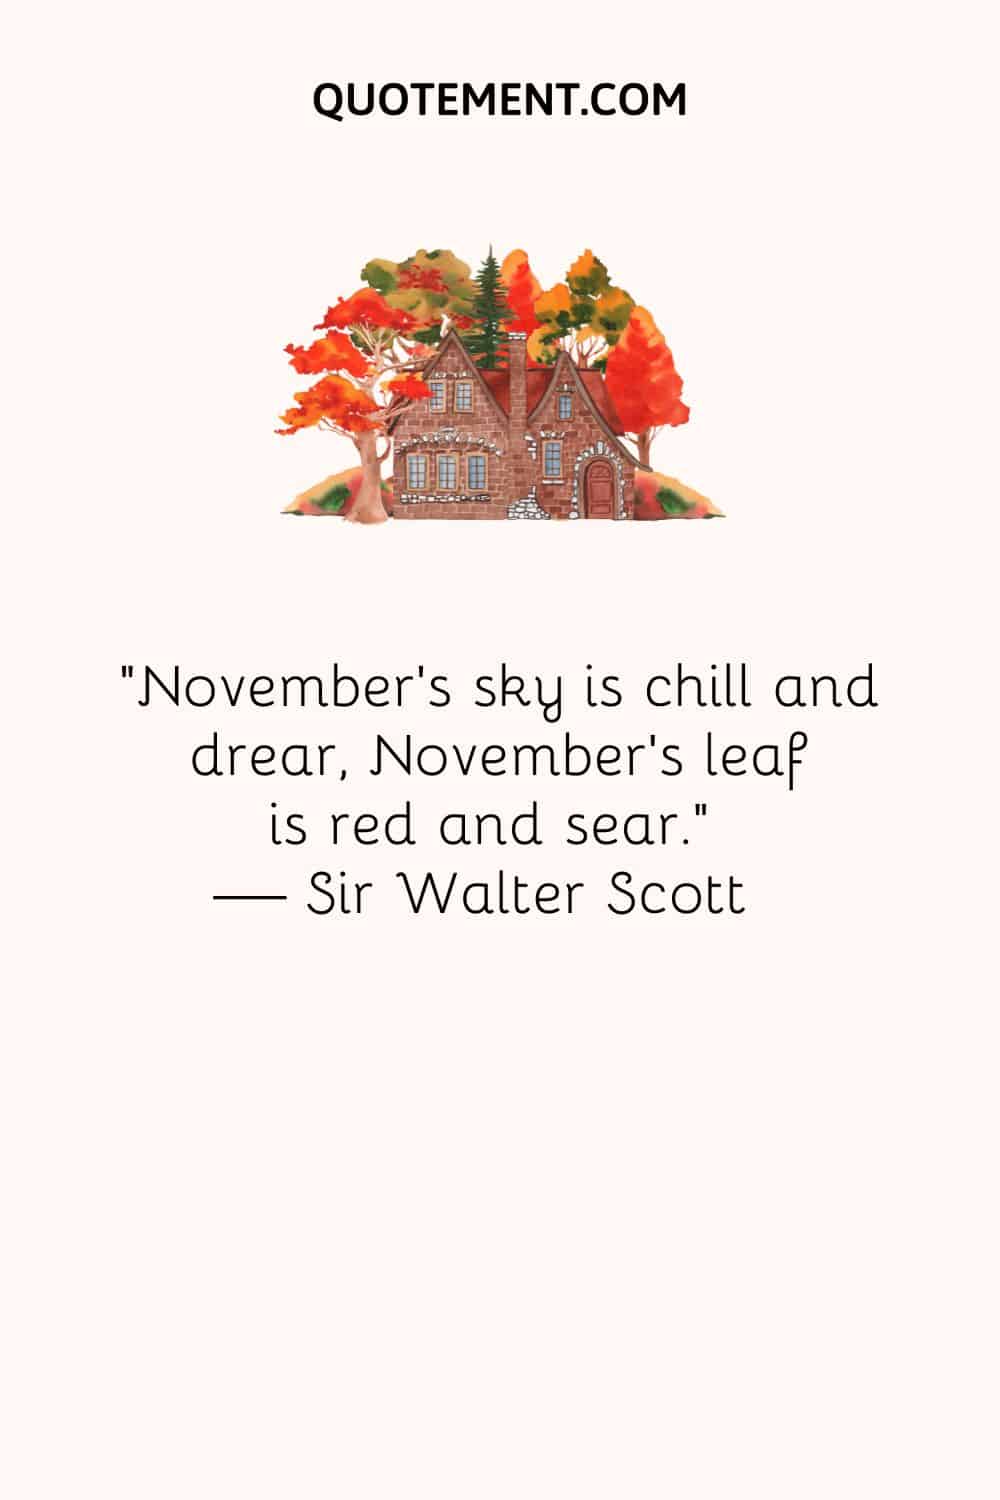 November’s sky is chill and drear, November’s leaf is red and sear